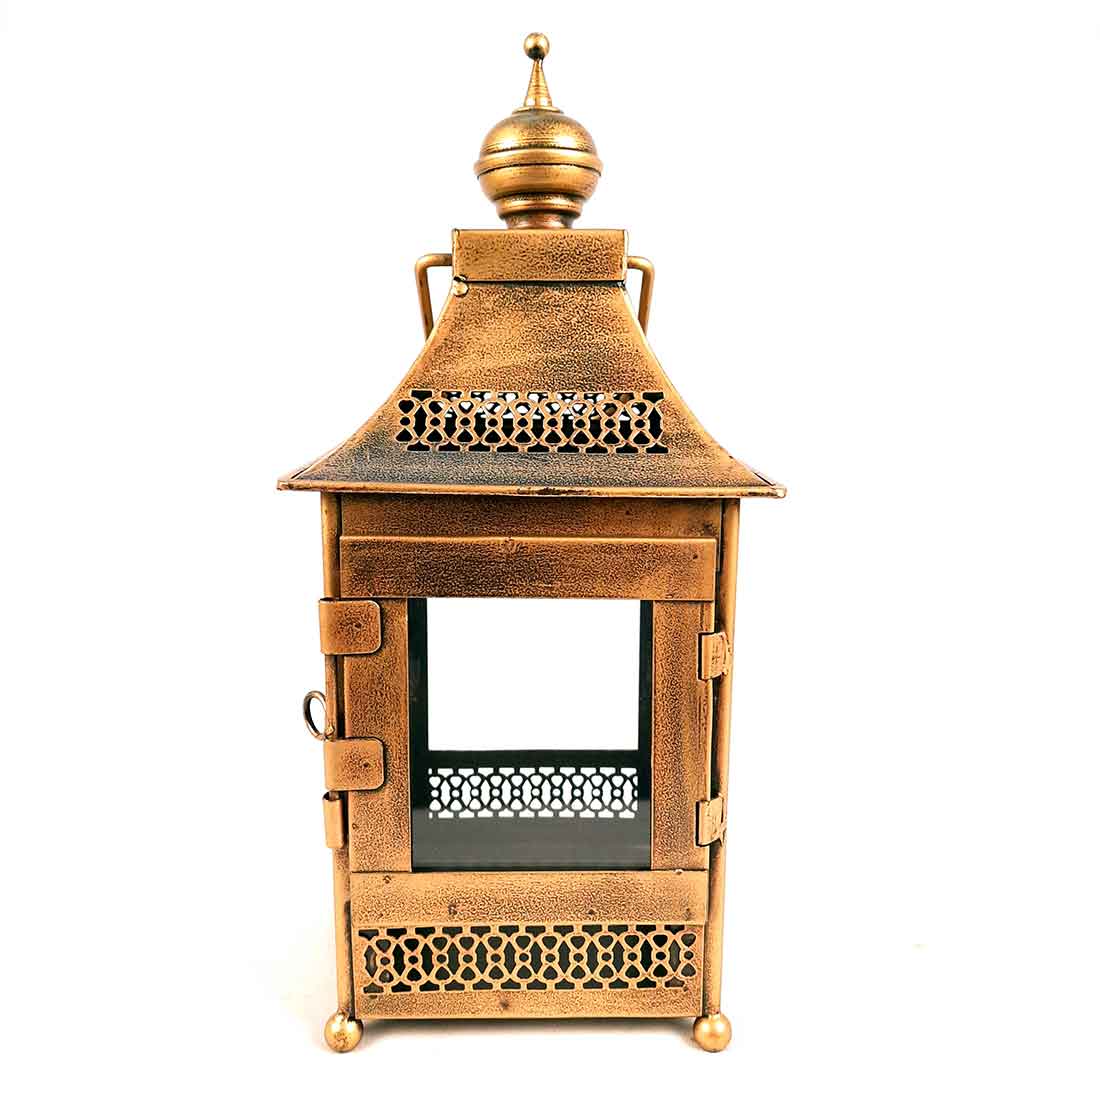 Lantern | Side Table Lamp - for Home Decor & Gifts - 16 inch - ApkaMart